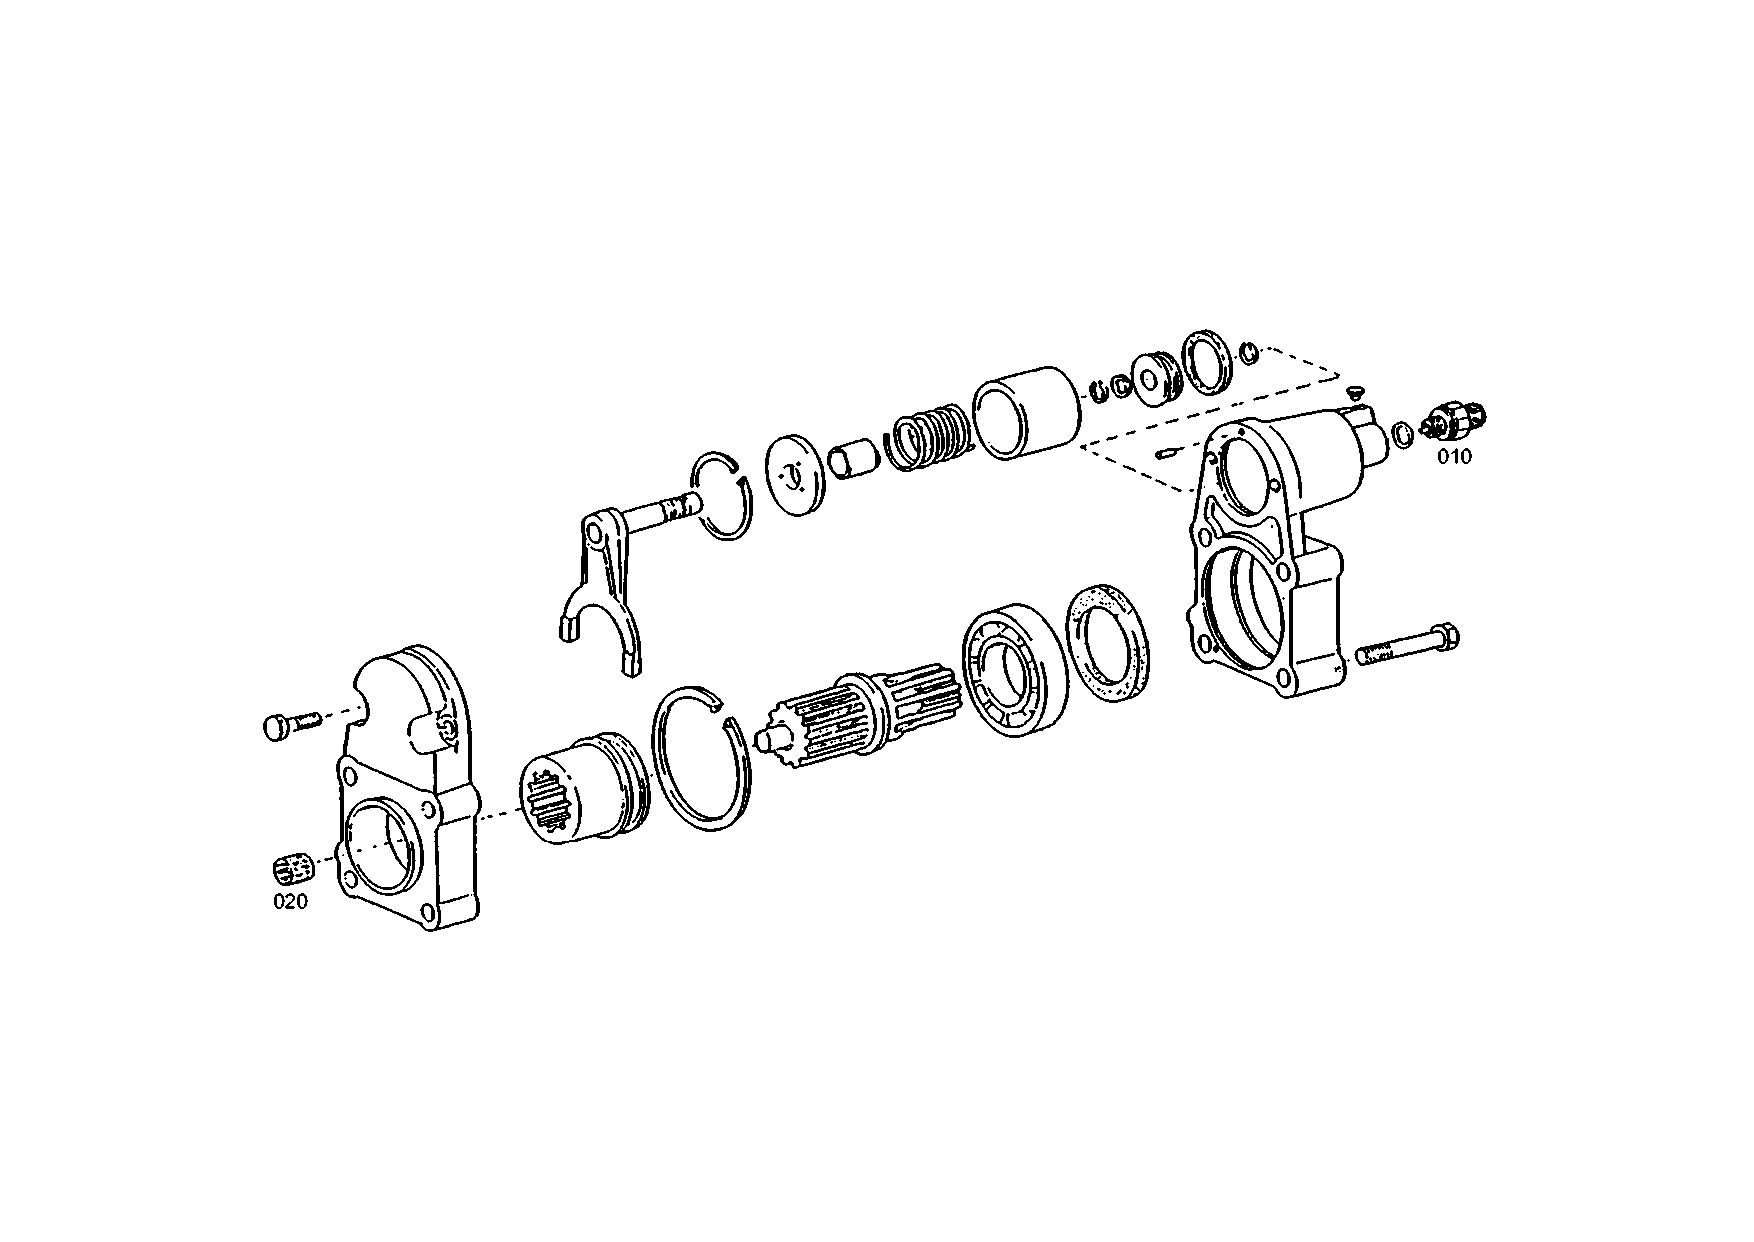 drawing for TITAN GMBH 171200710001 - PRESSURE SWITCH (figure 1)